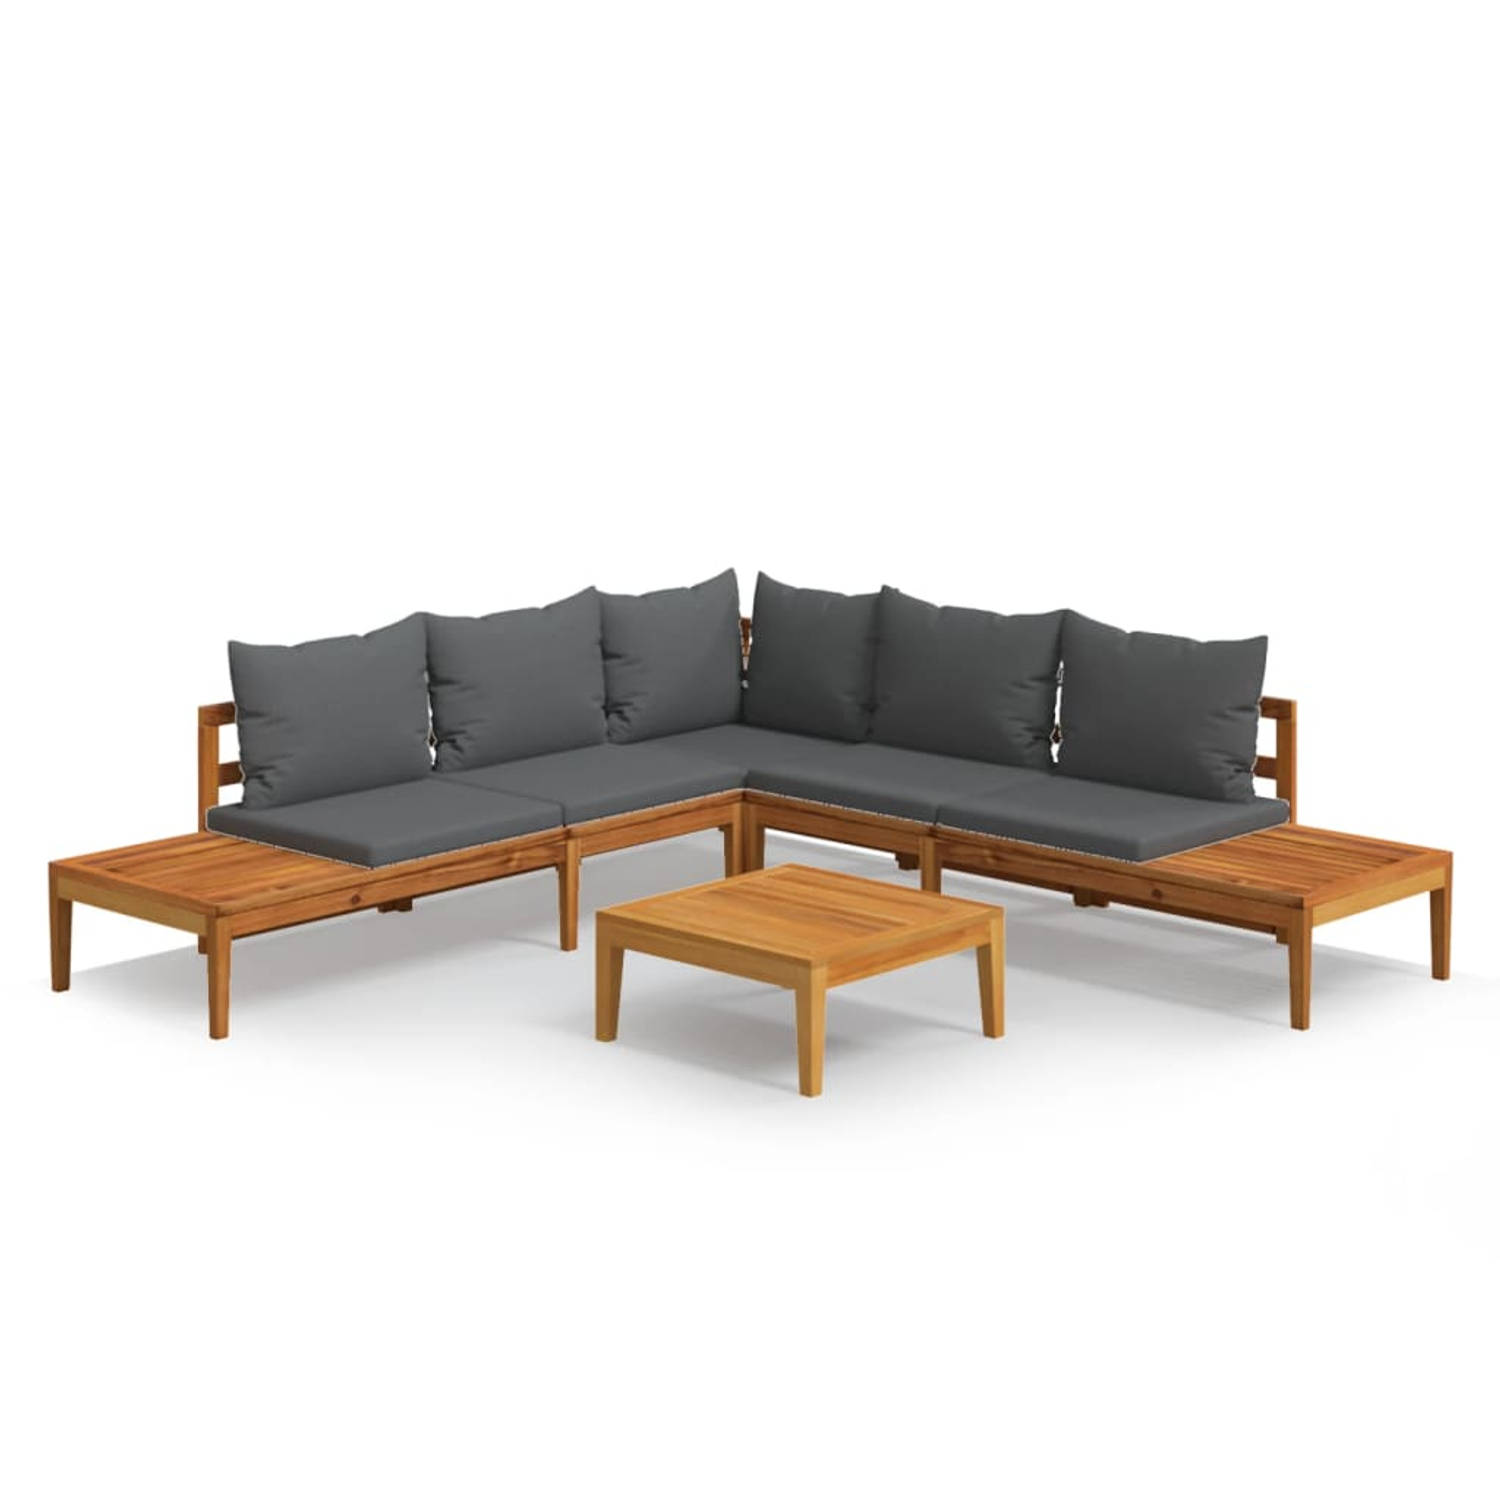 The Living Store Houten Tuin Loungeset - 175x66x60 cm - Donkergrijs kussen - Acaciahout